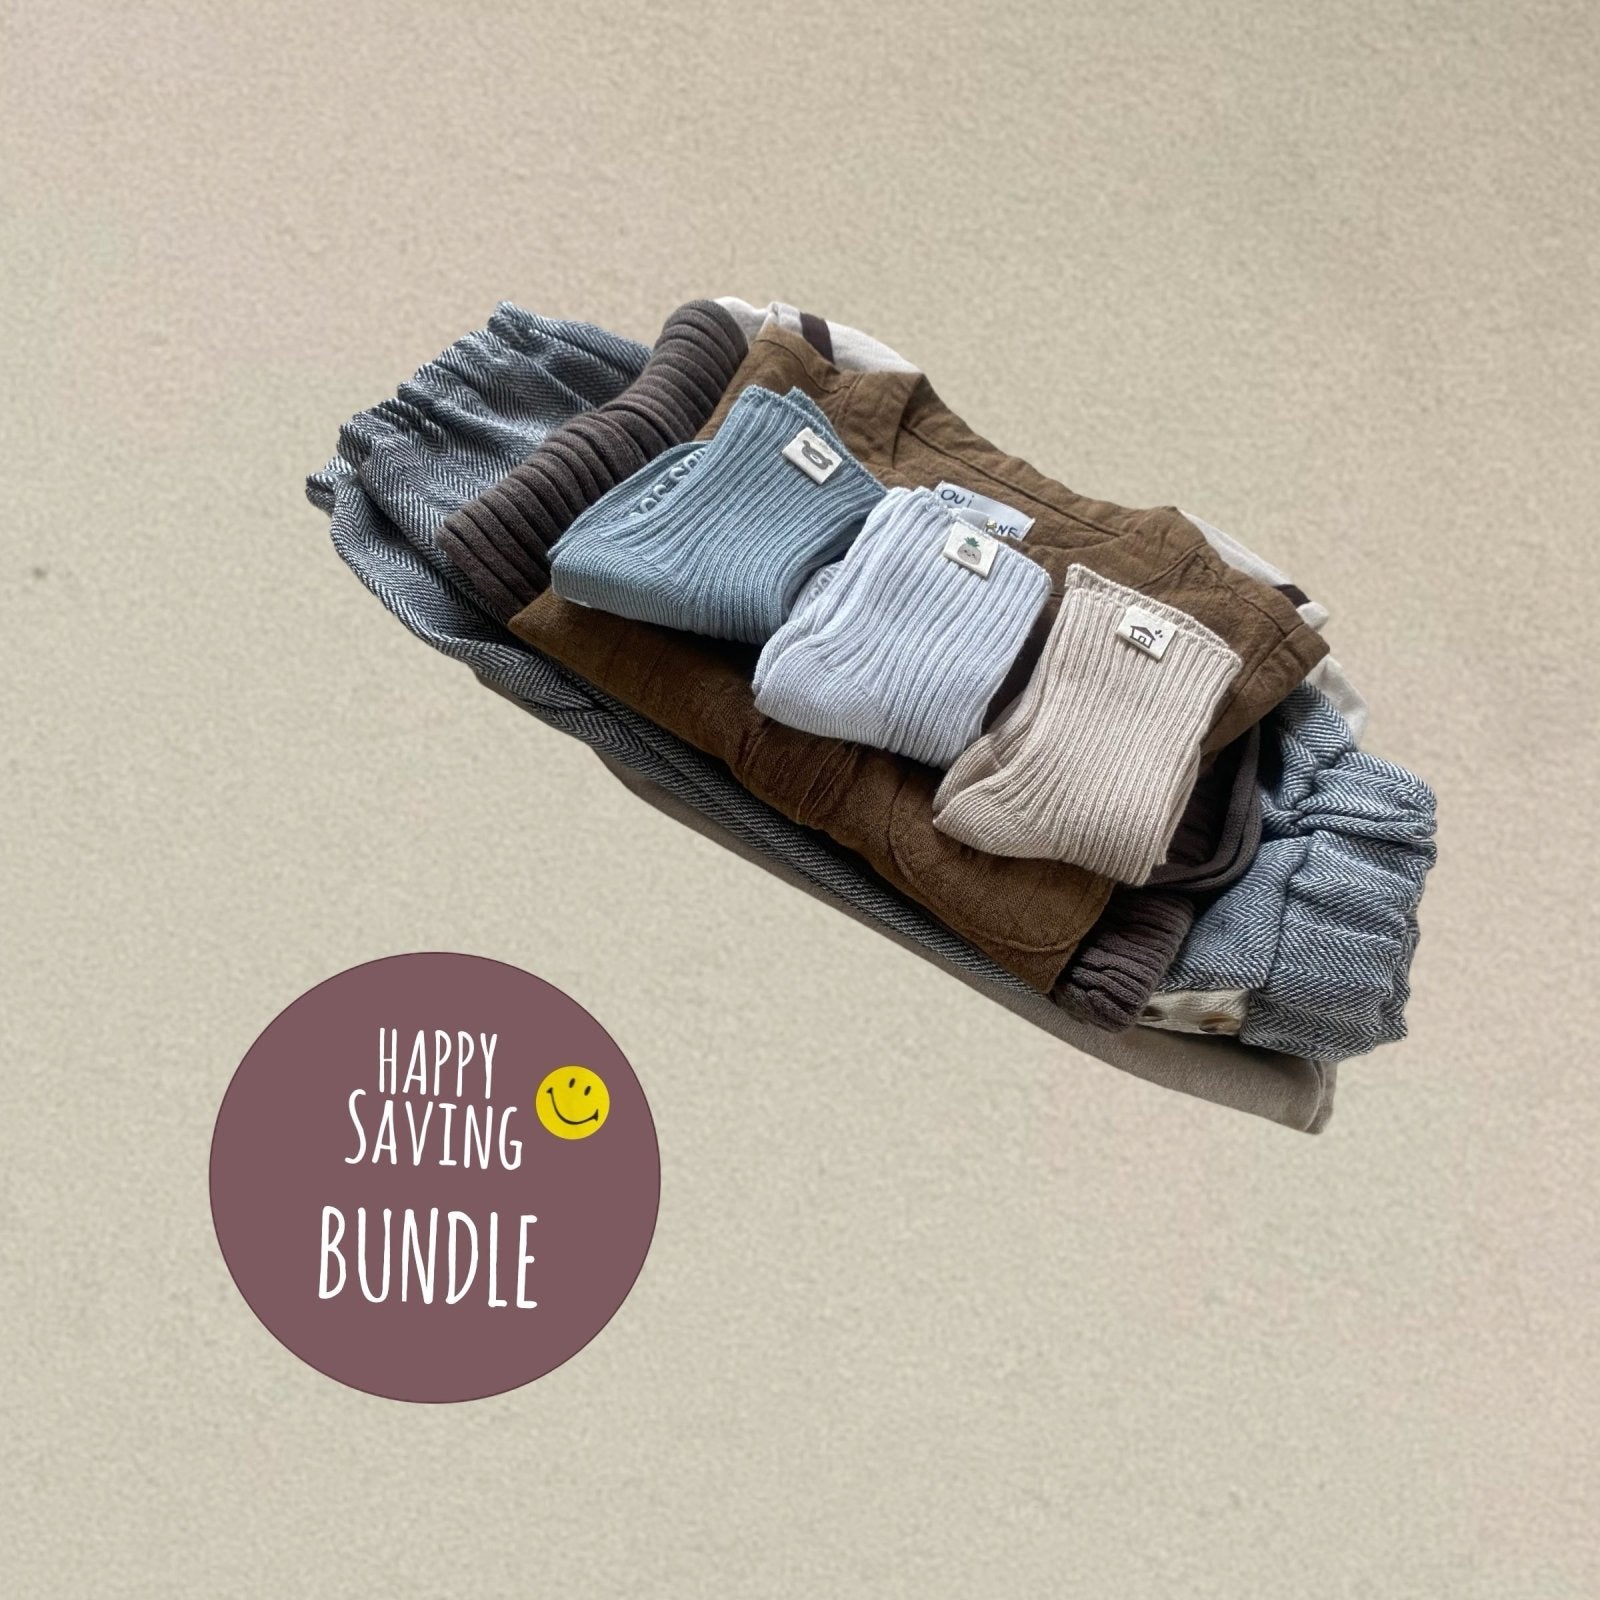 Happy Saving BUNDLE - 6-12 M Baby Boy find Stylish Fashion for Little People- at Little Foxx Concept Store